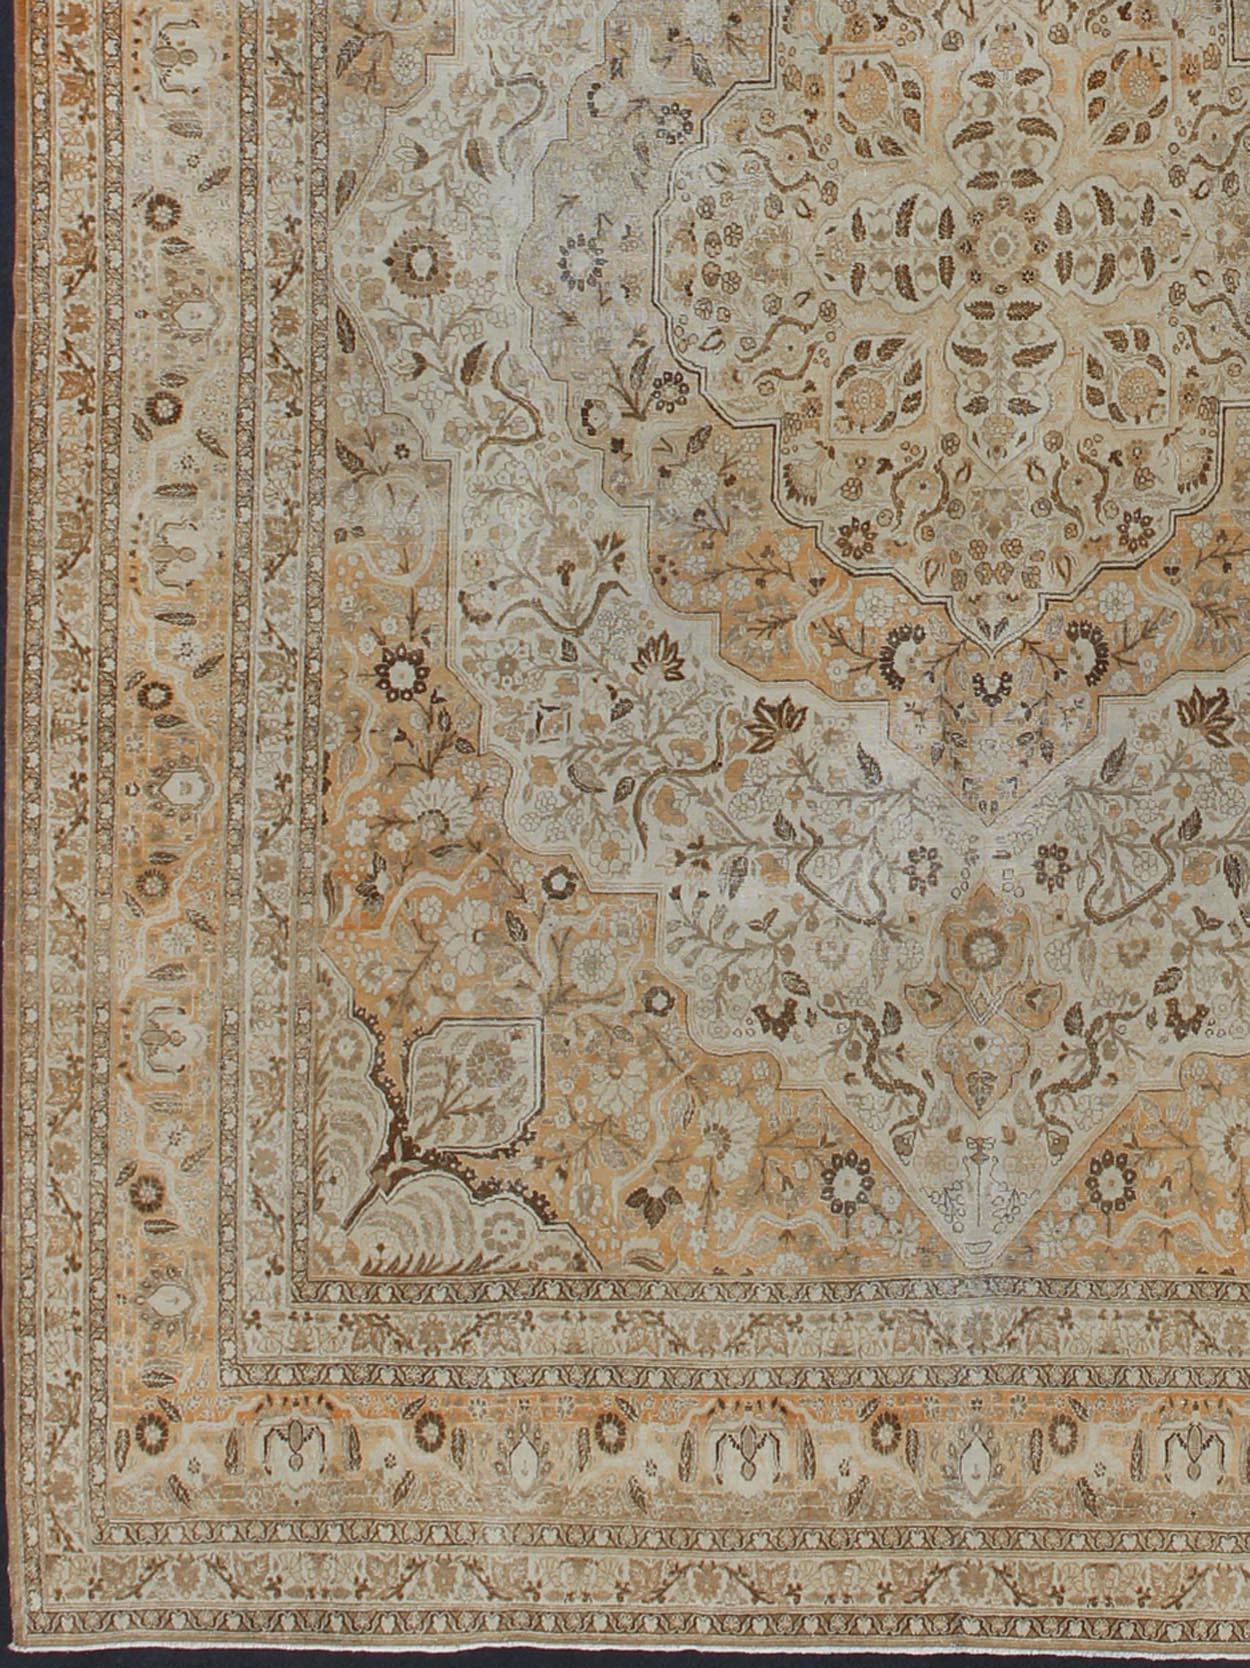 Antique Persian Tabriz Haji Jalili type rug with layered medallion in coral, gray, peach, taupe, cream. Keivan Woven Arts / EMA-7510, country of origin / type: Iran / Tabriz, circa 1900
Measures: 11' x 16'8.  
This light colored antique Persian